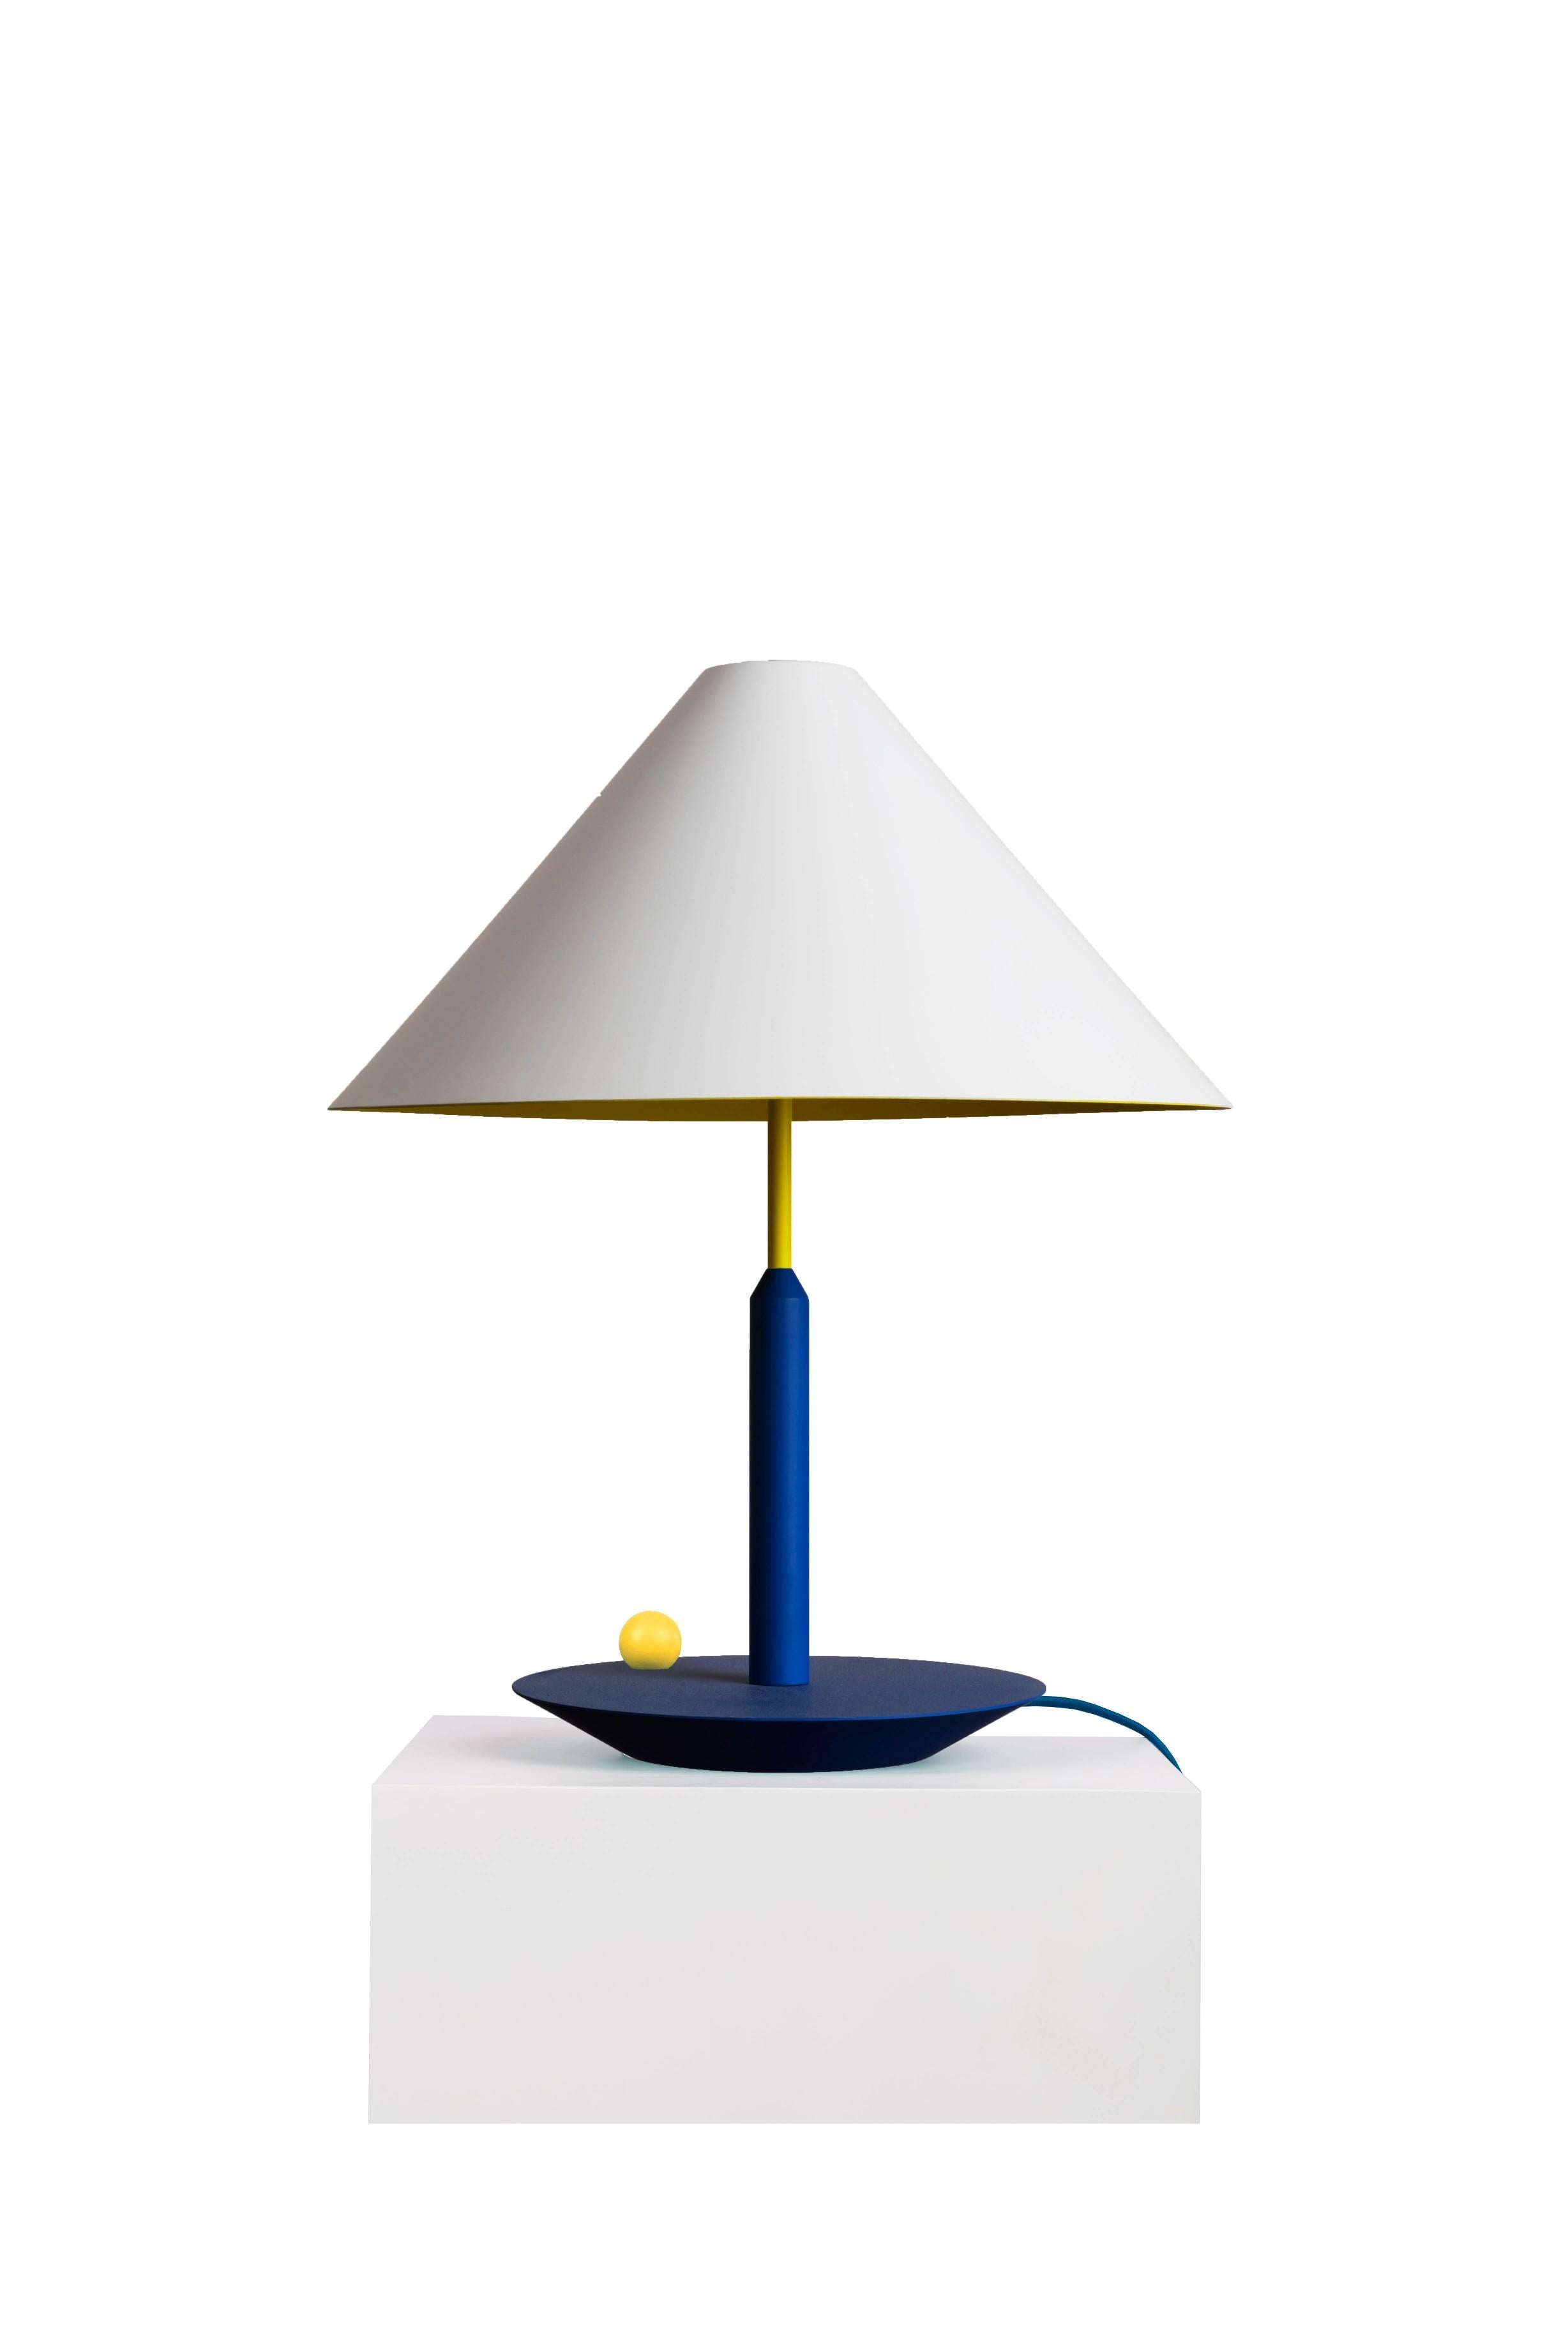 Colorful table lamp by Thomas Dariel, Maison Dada
Measures: Diameter 45 x height 55 cm
Tricolored
Powder coated metal shade in matte white
Vibrant complementary tones on lampshade’s interior and base
Color cable
220V – 240V 50Hz E27